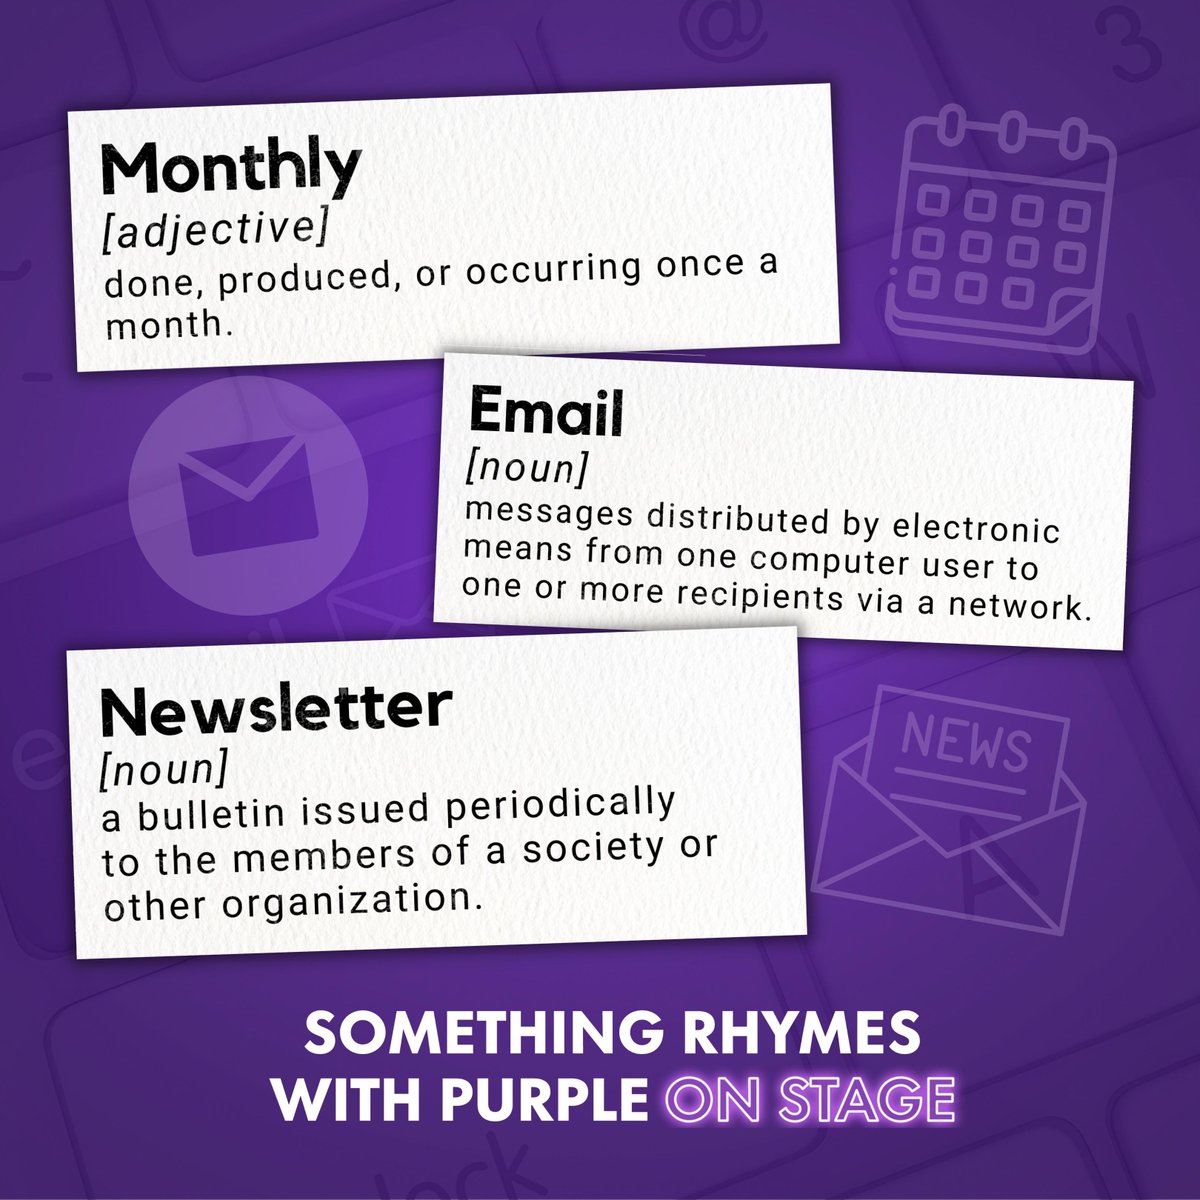 Do you want the inside scoop of what's going on in the world of Something Rhymes with Purple before anyone else? 👀 Sign up to our monthly newsletter for the latest live show news, theme announcements, podcast updates and more!📧 Head to SomethingRhymeswithPurple.com to sign up! 💜